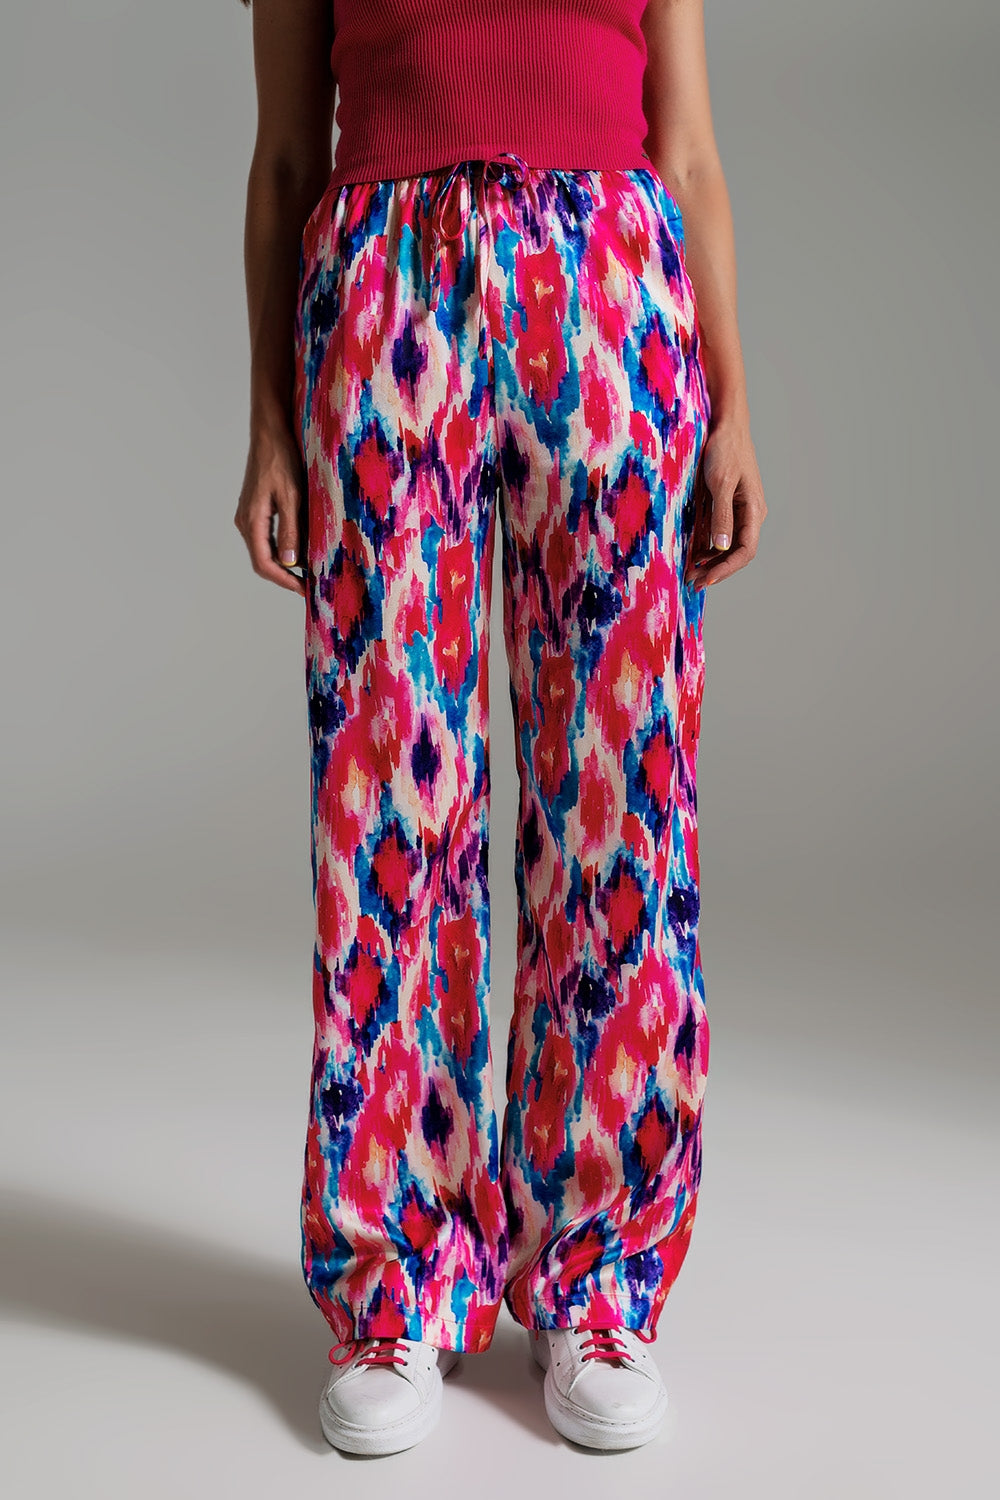 Q2 Palazzo Style Pants in Abstract Pink and Blue Print